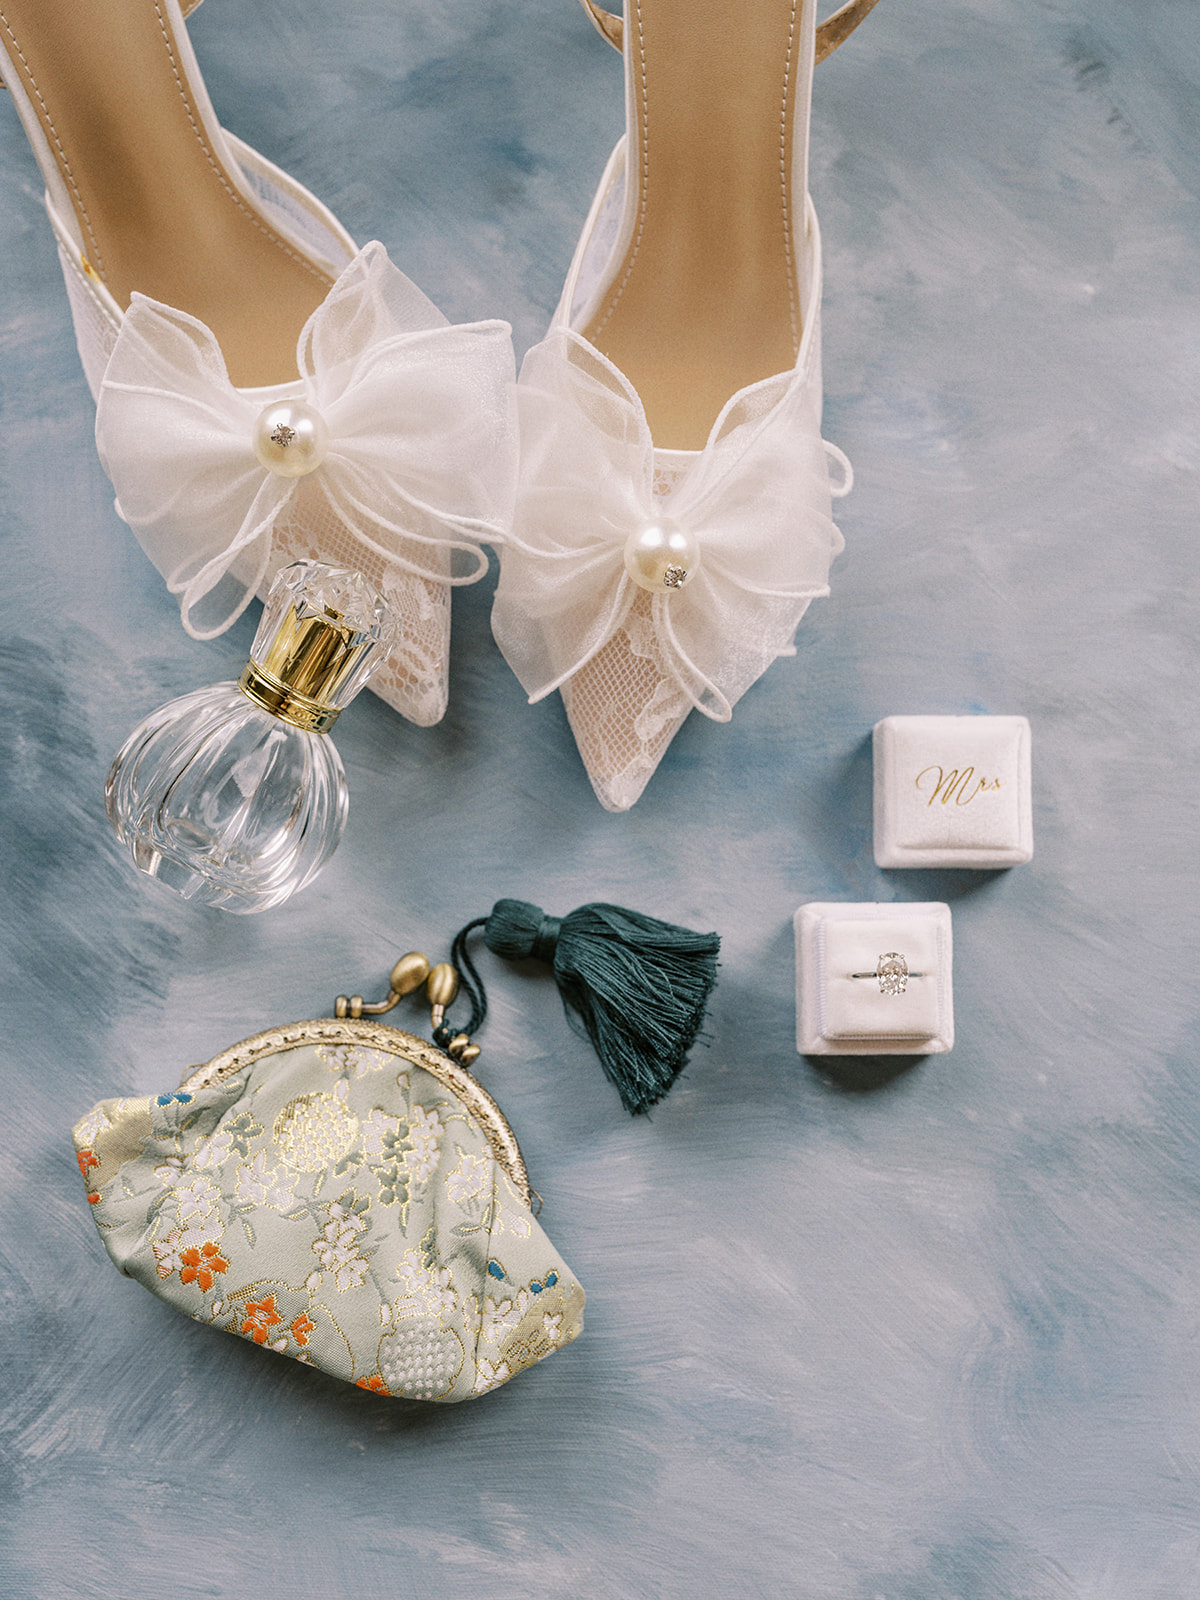 Elegant bridal details featuring lace heels with pearl and bow detailing, “Mrs” ring box and mediterranean inspired clutch captured by Justine Milton.